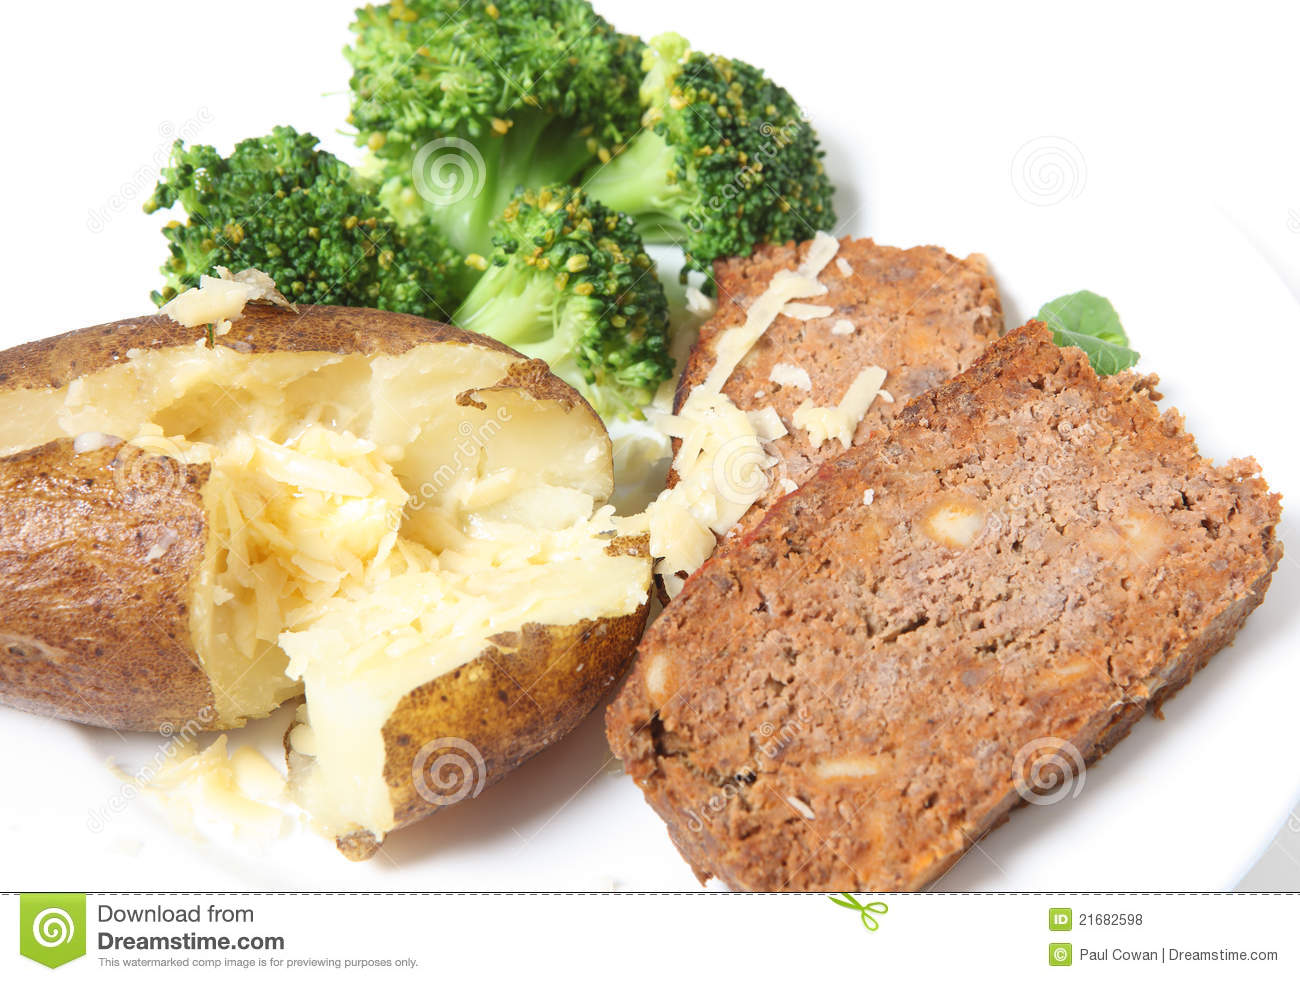 Meal Of Meatloaf Served With Baked Potato Grated Cheese And Broccoli